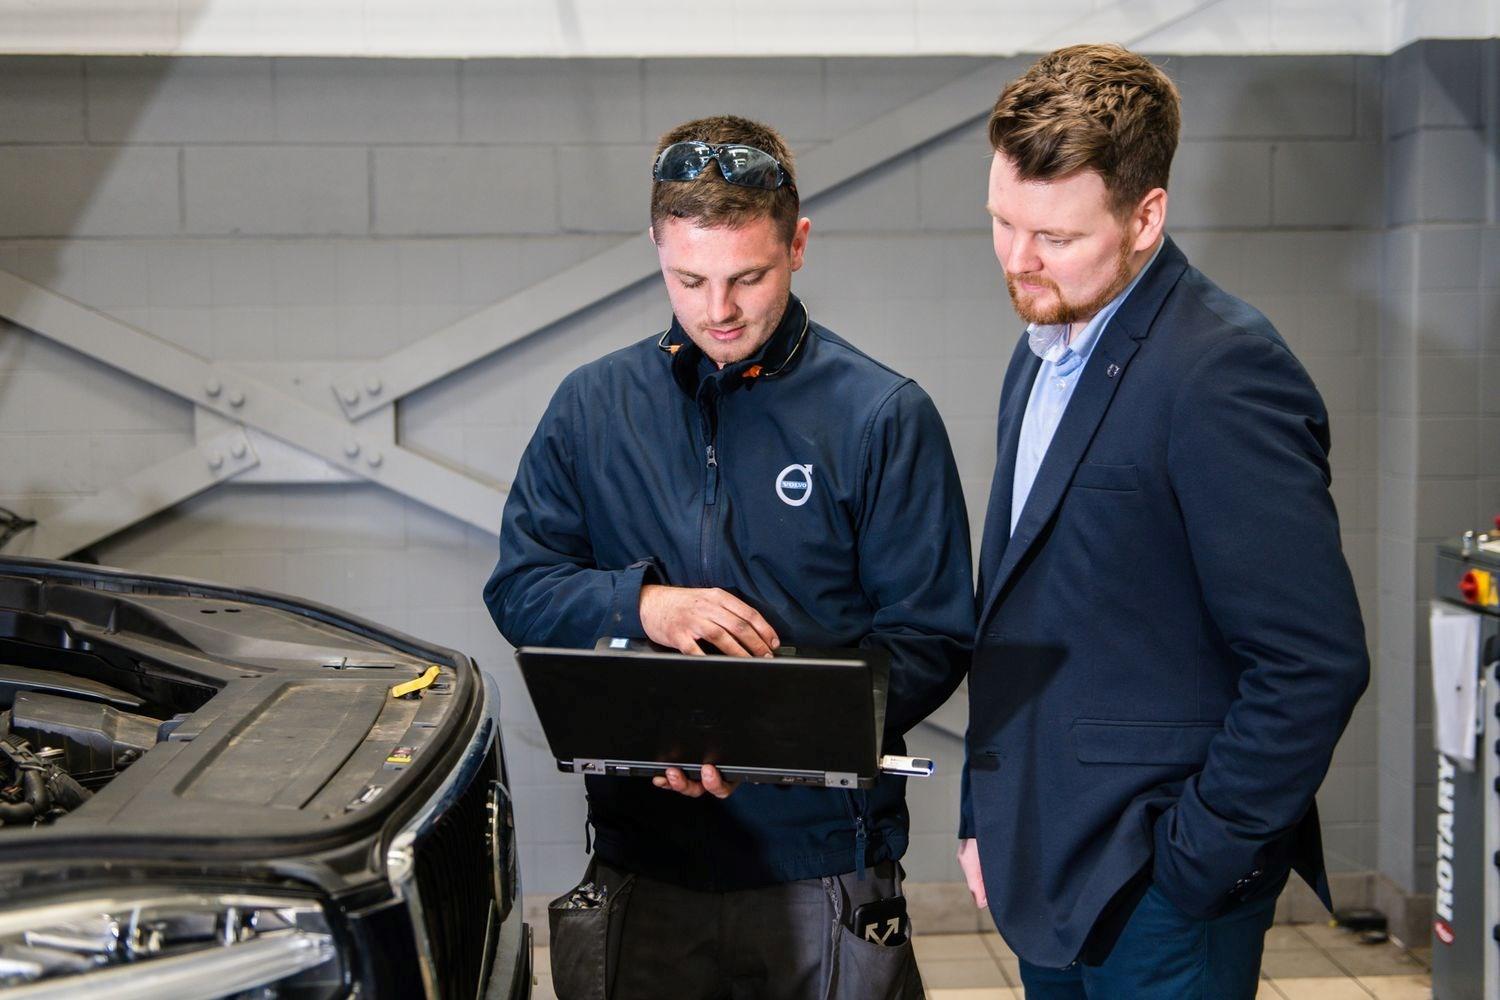 Agnew Belfast Volvo Mechanic inspects used volvo by using laptop during MOT preparation